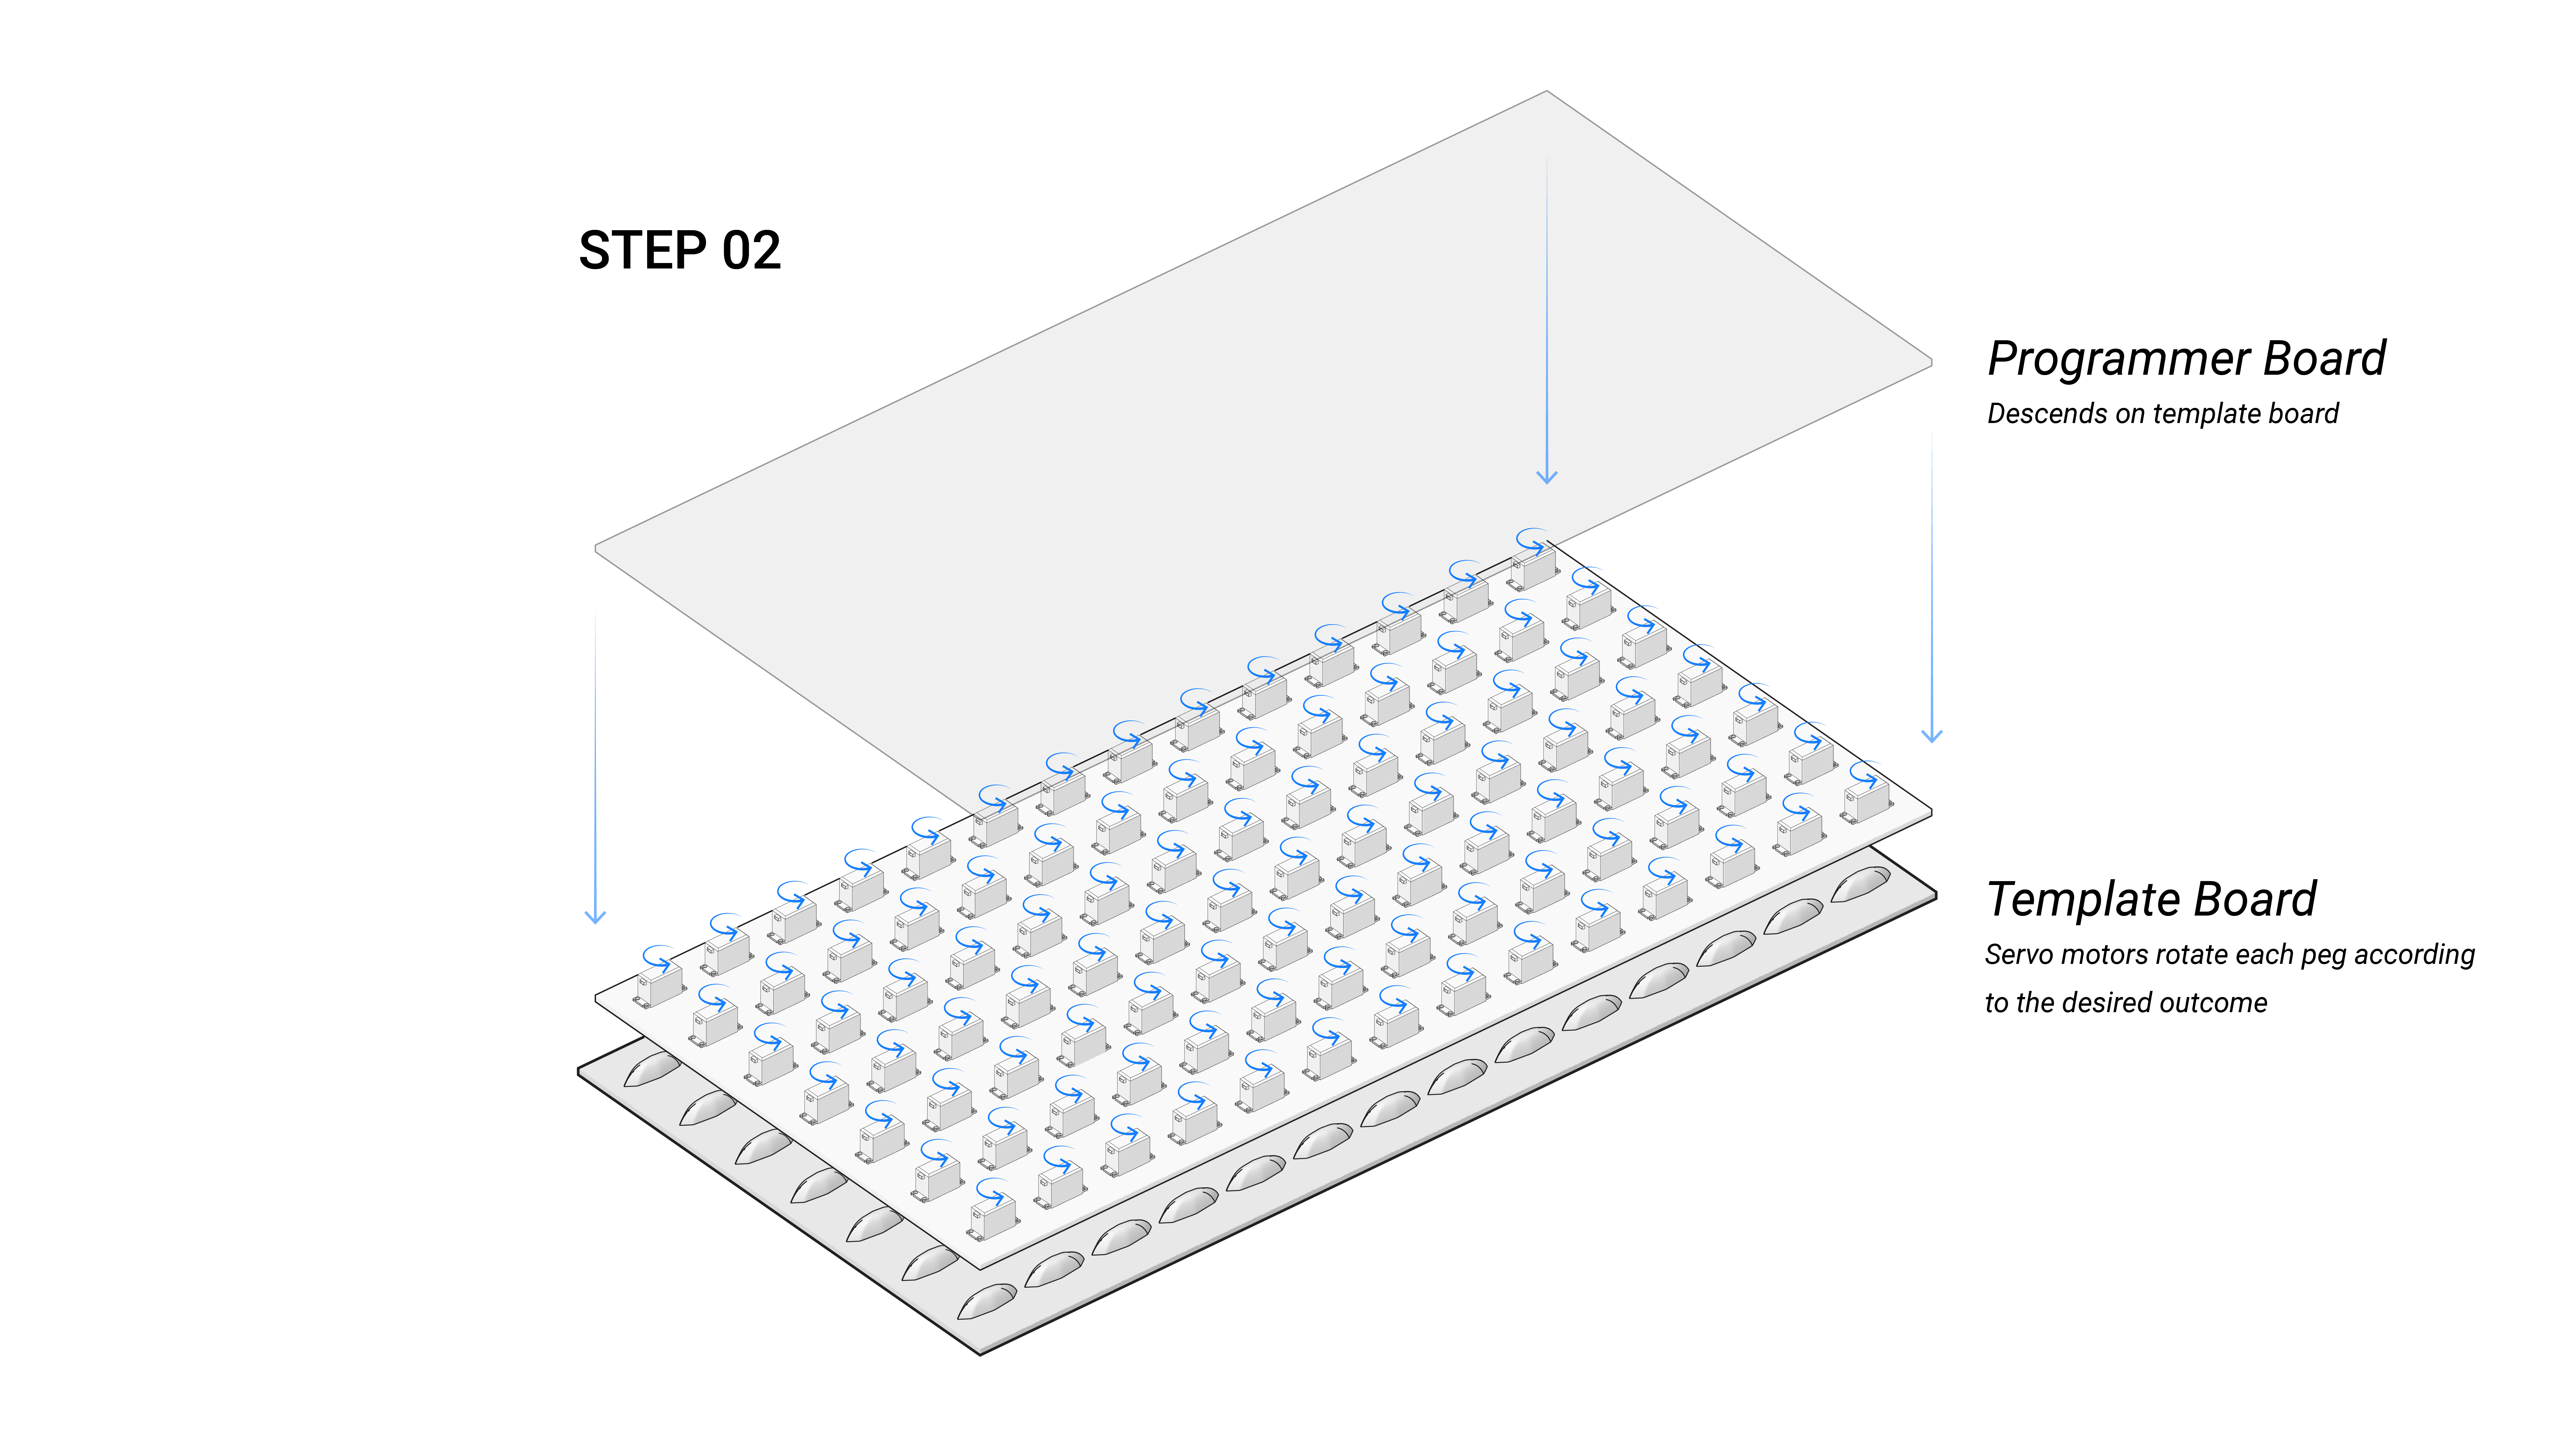 Diagram of step 2 of the MATS workflow, programmer board  descends on template interlocks and rotates each peg 